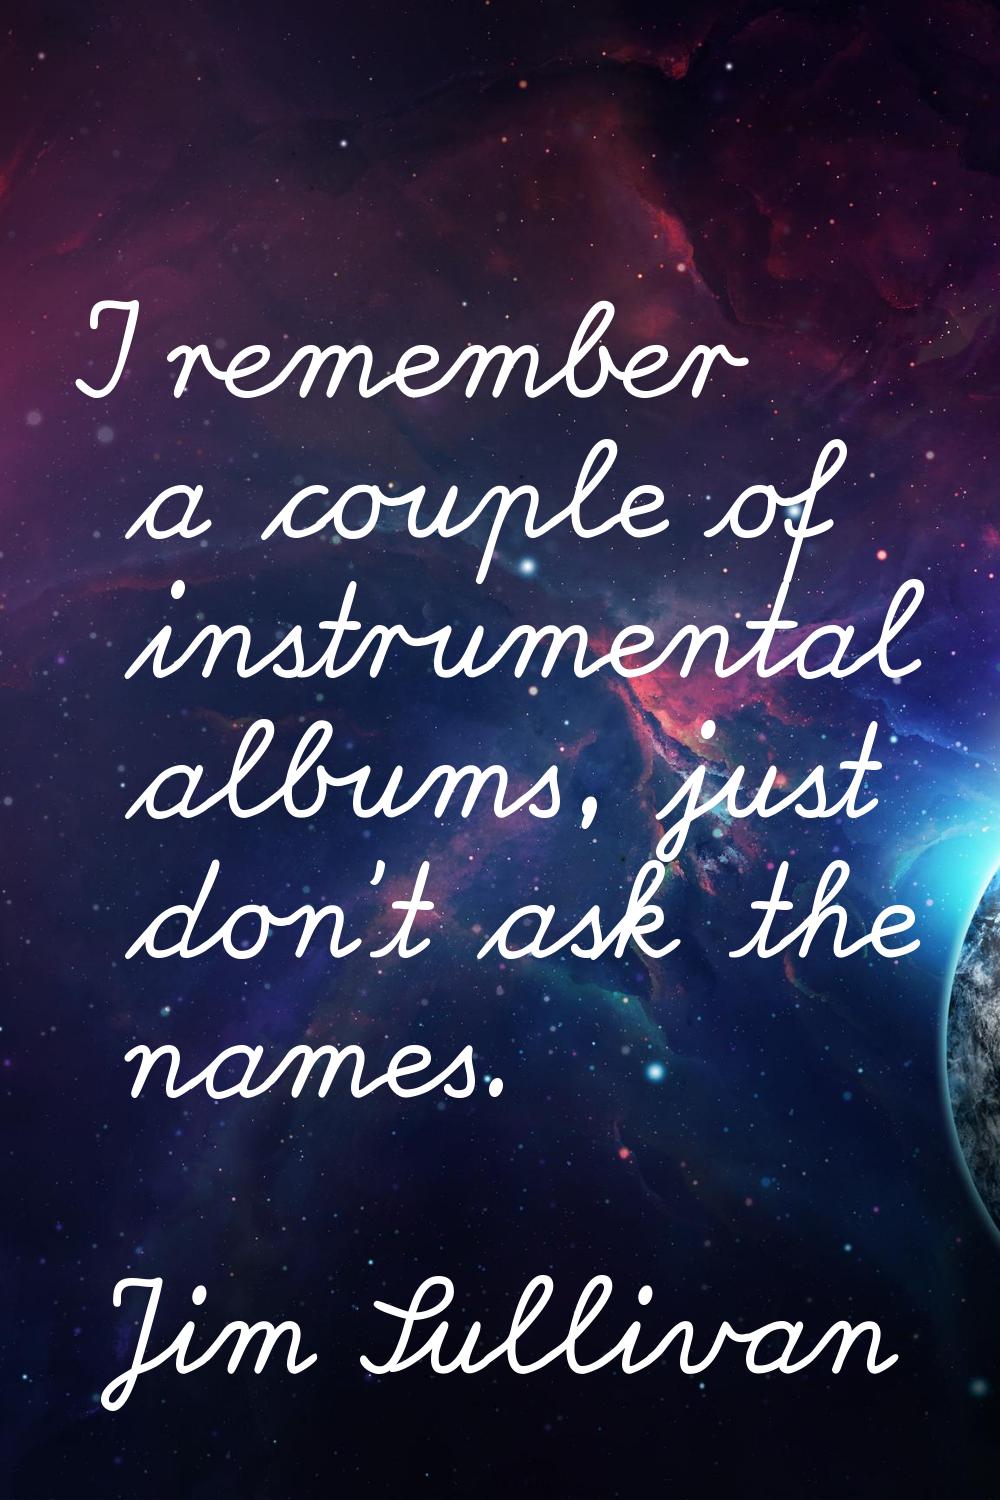 I remember a couple of instrumental albums, just don't ask the names.